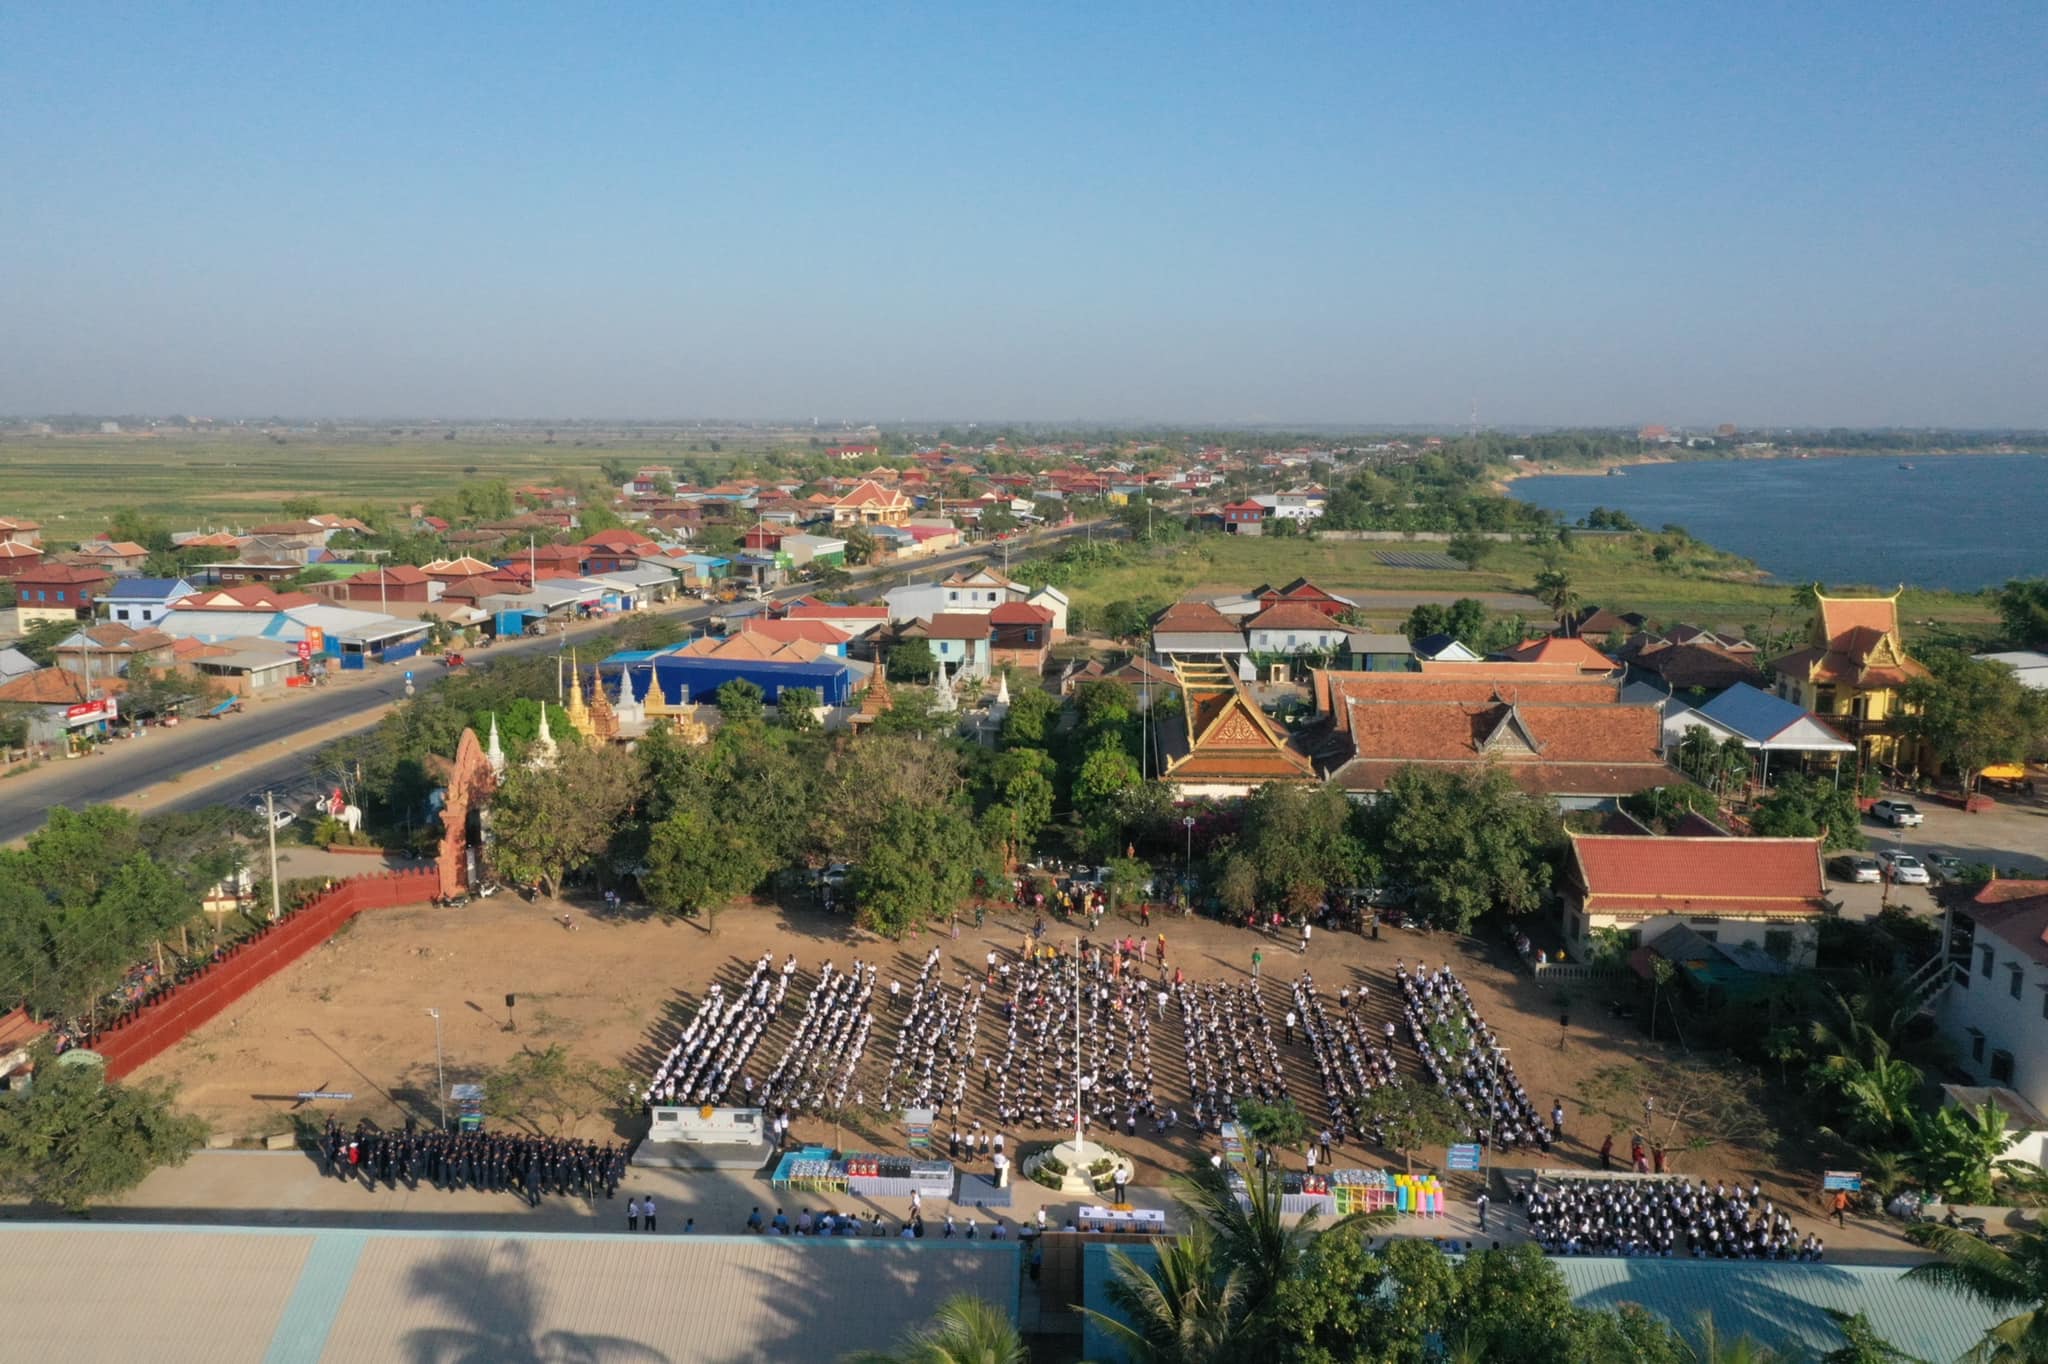 Charity at Cambodian school